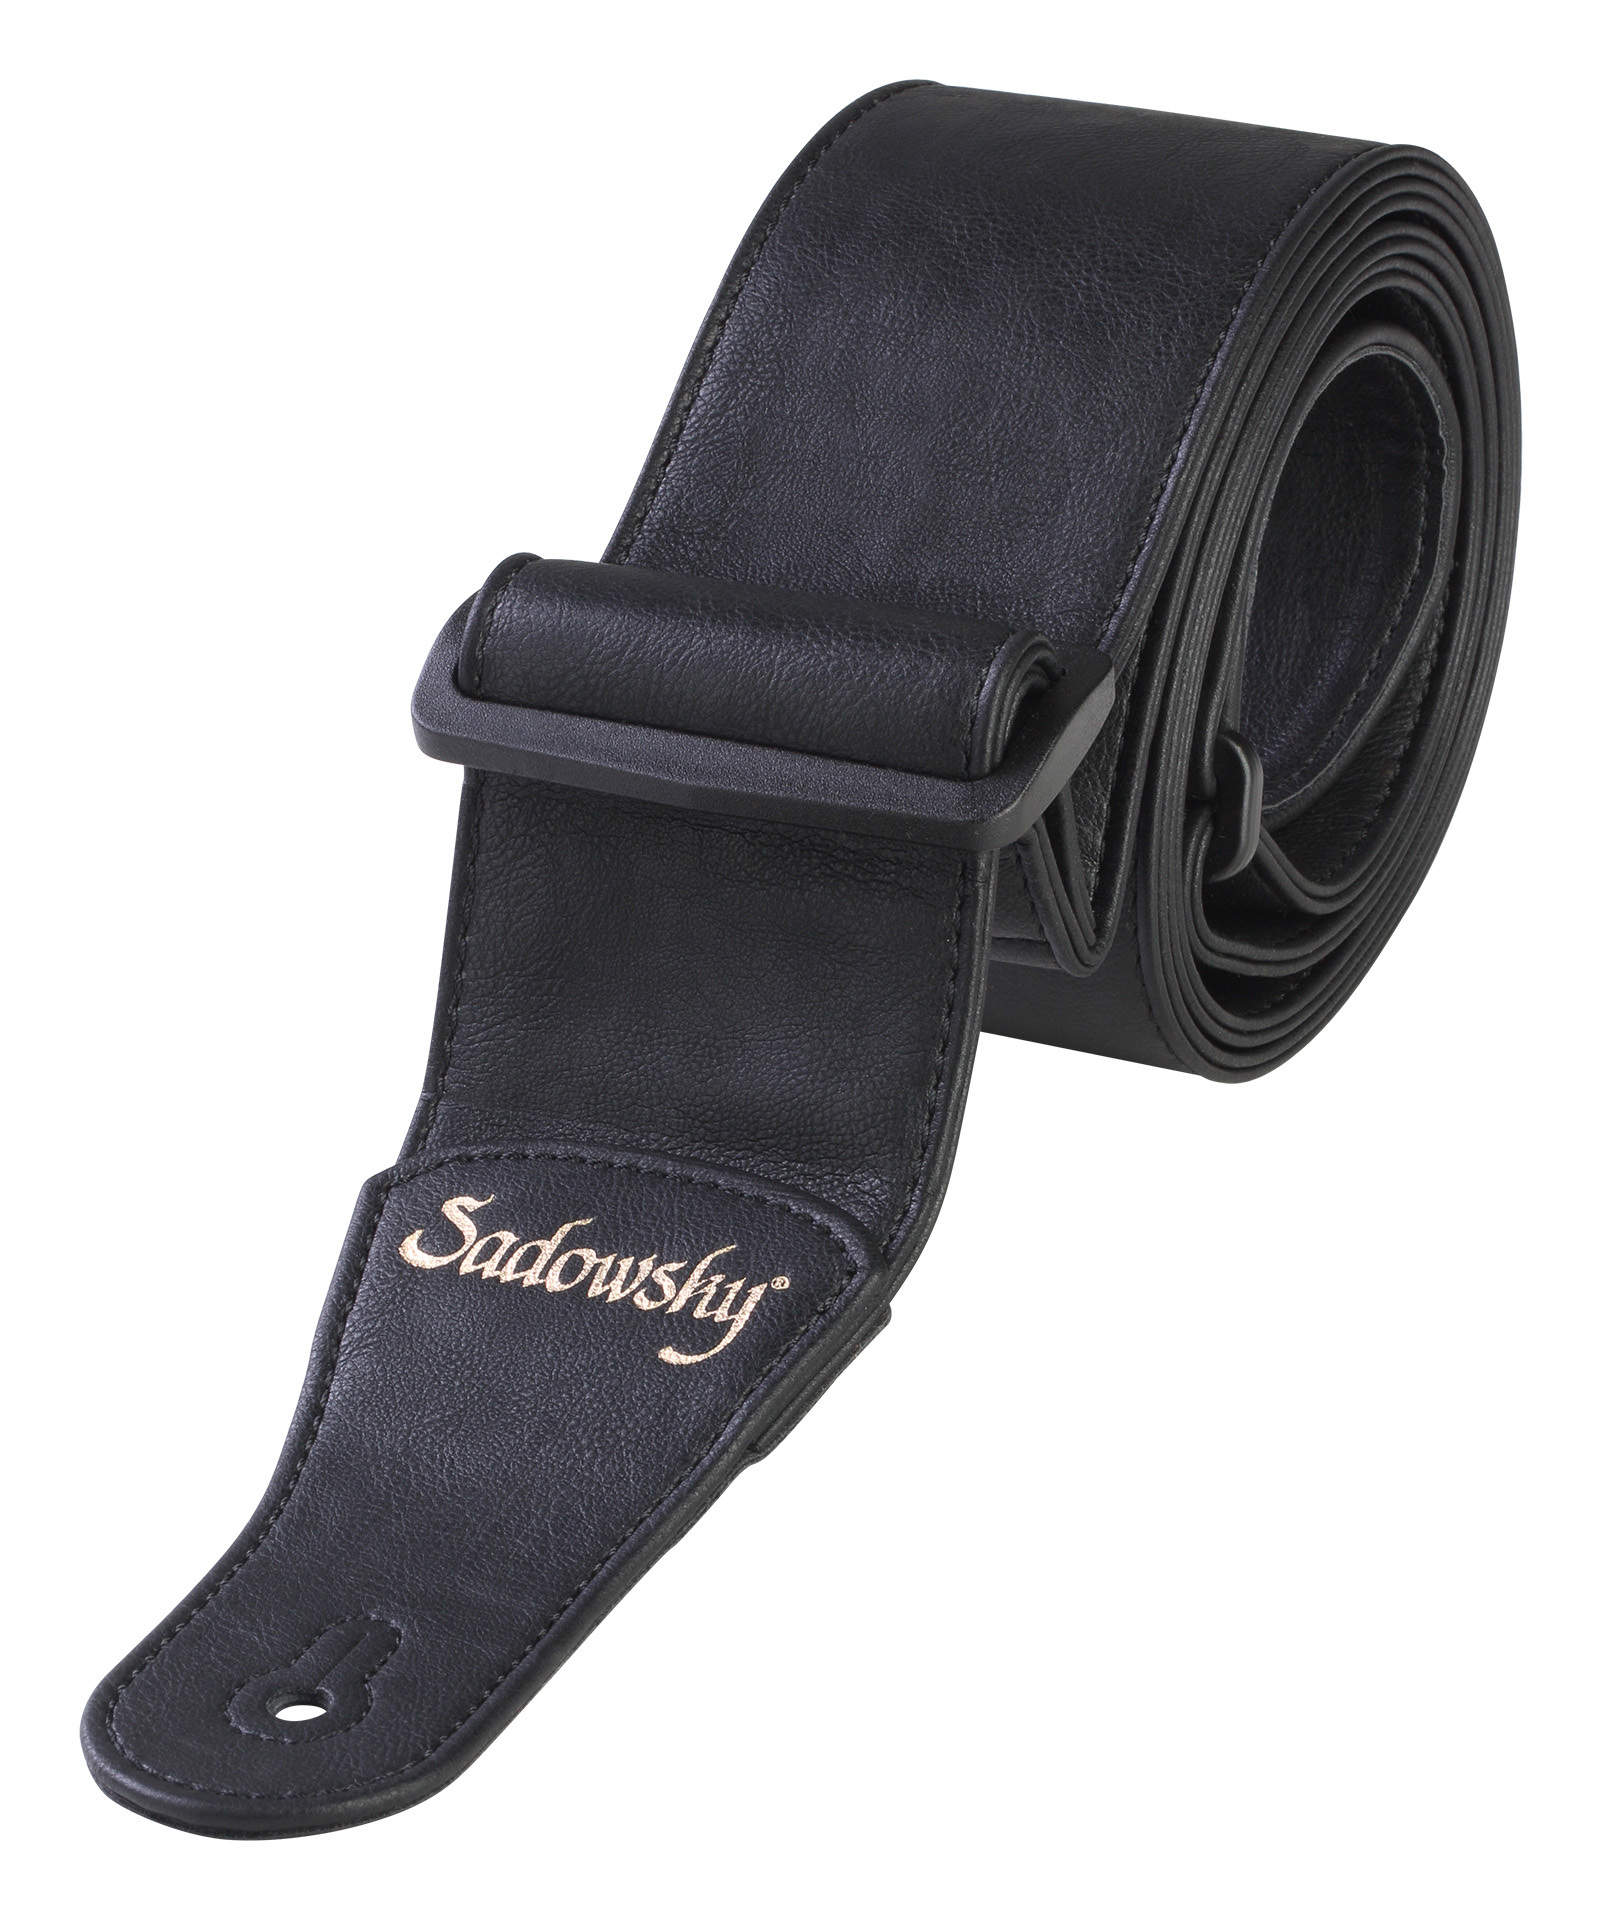 Sadowsky Synthetic Leather Bass Strap - Black, Gold Embossing